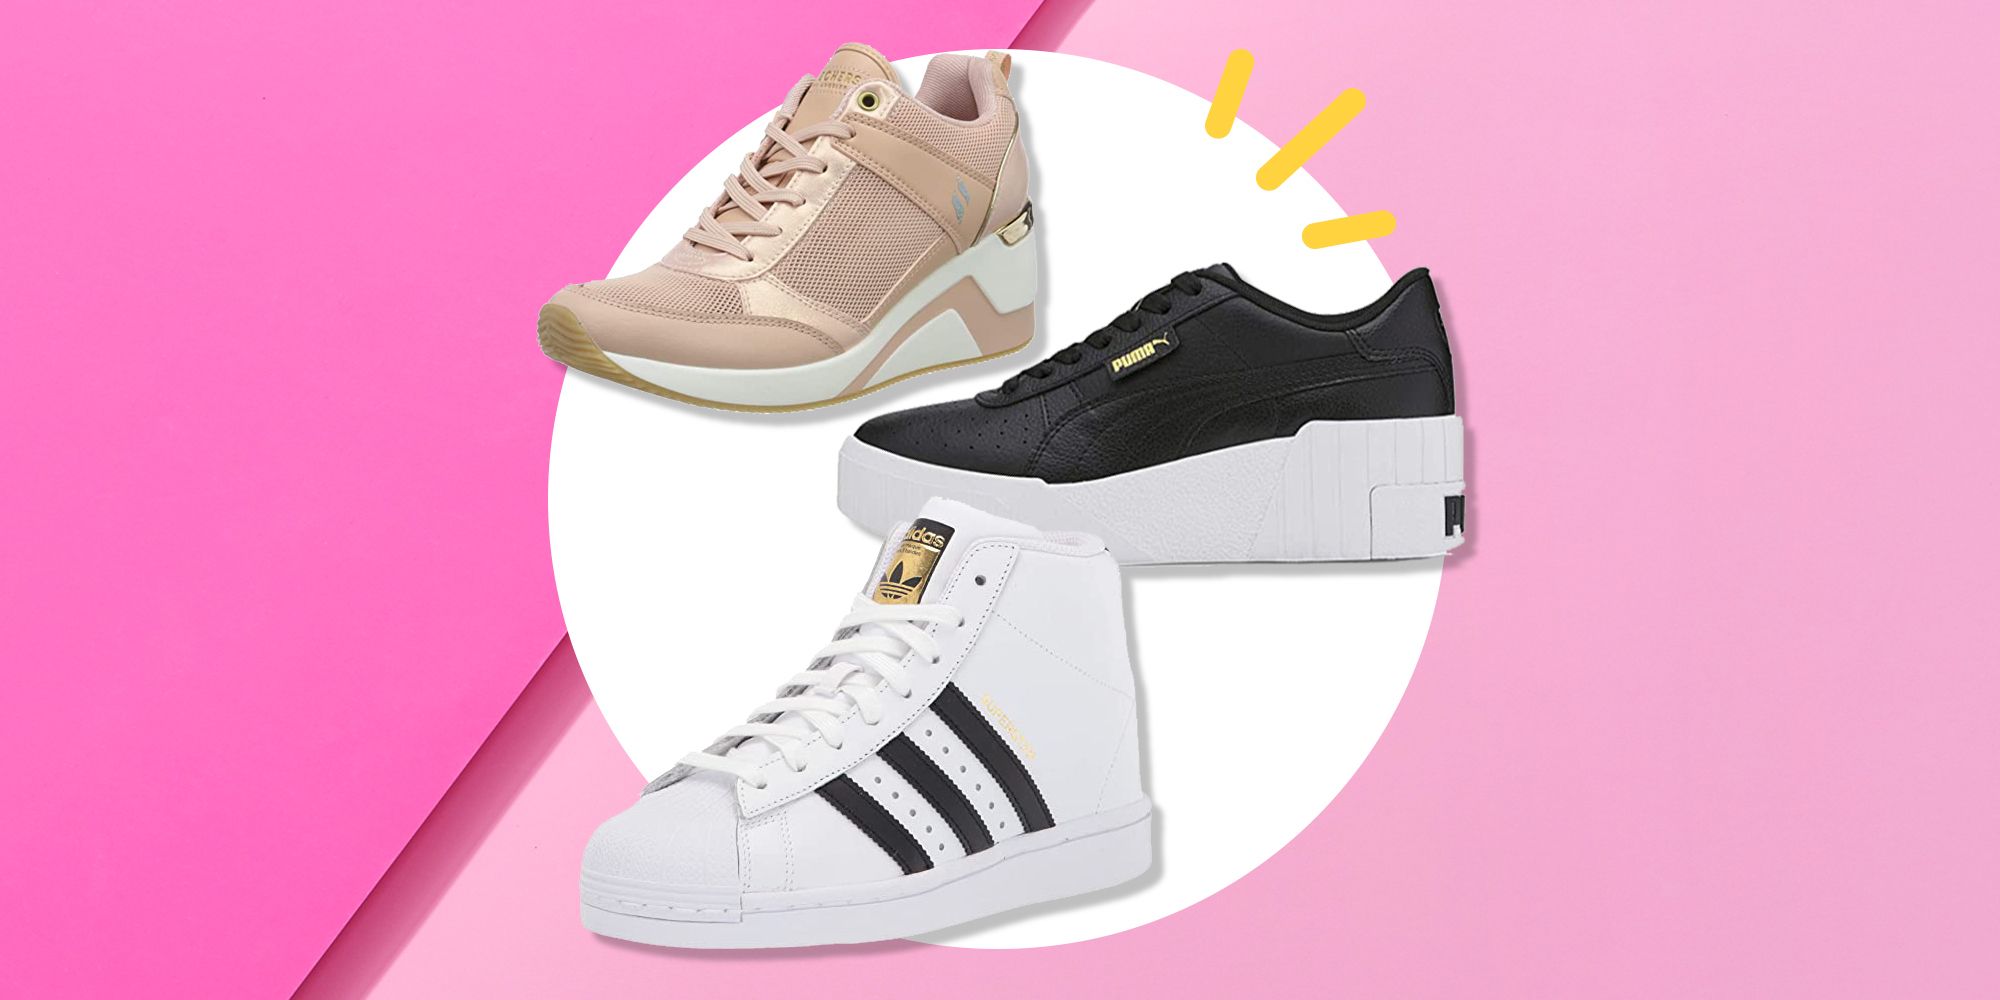 Walking Shoes for Women,Womens Wedge Sneakers Comfort Platform Tennis Shoes Lace Up Casual Sneaker for Running 